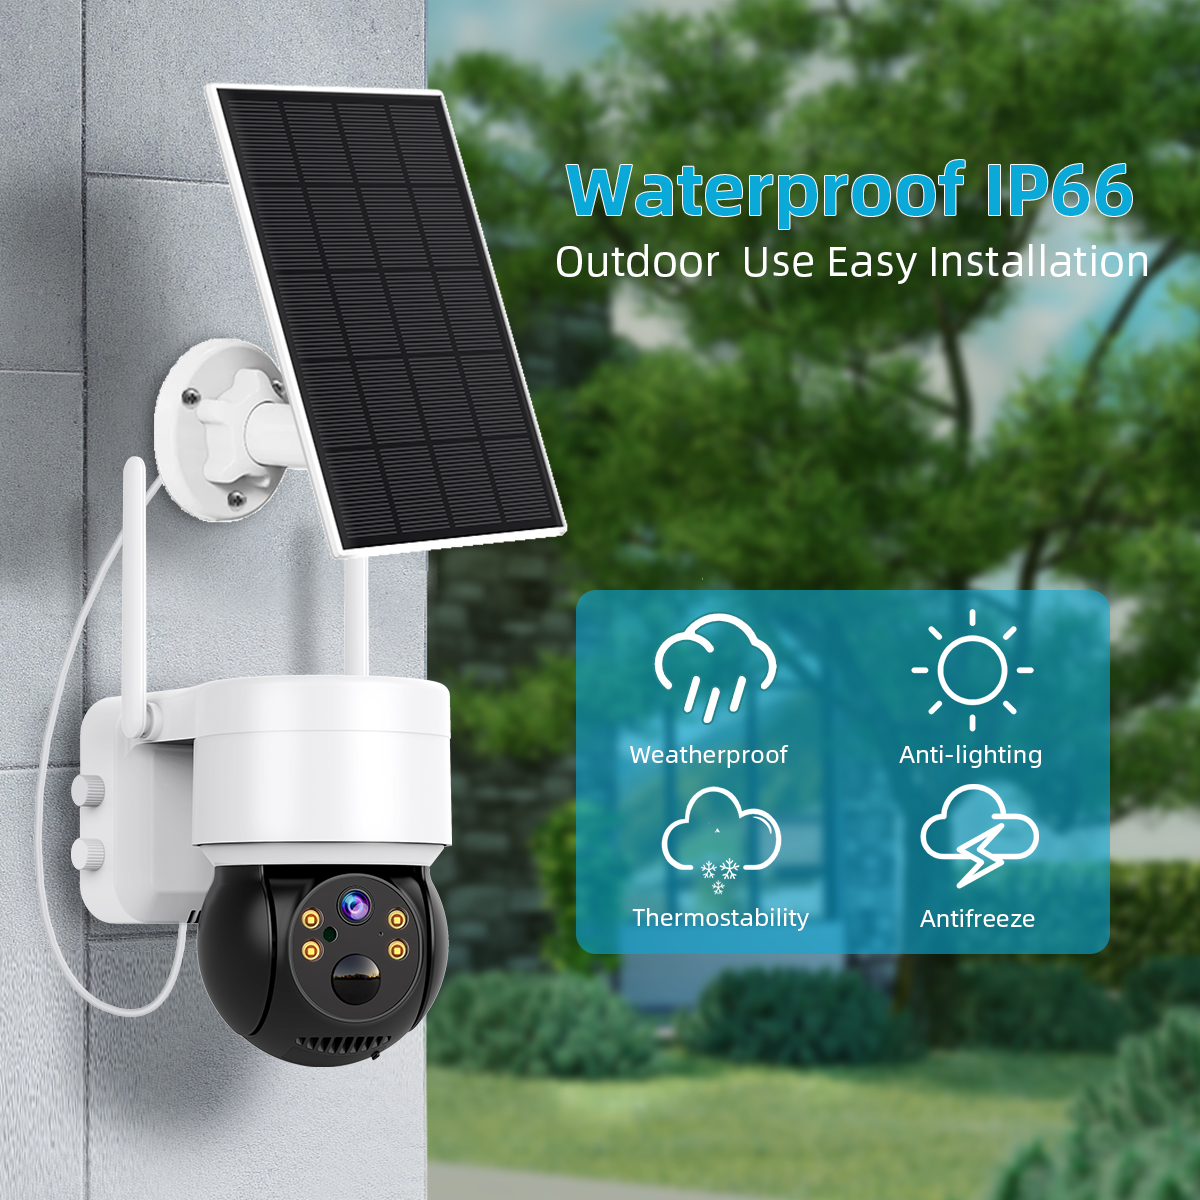 Q6 5W Solar-Powered Wireless Camera 2MP HD Low Power Consumption PIR Human Detection Night Vision 2-way Audio IP66 Waterproof Home Security Cameras